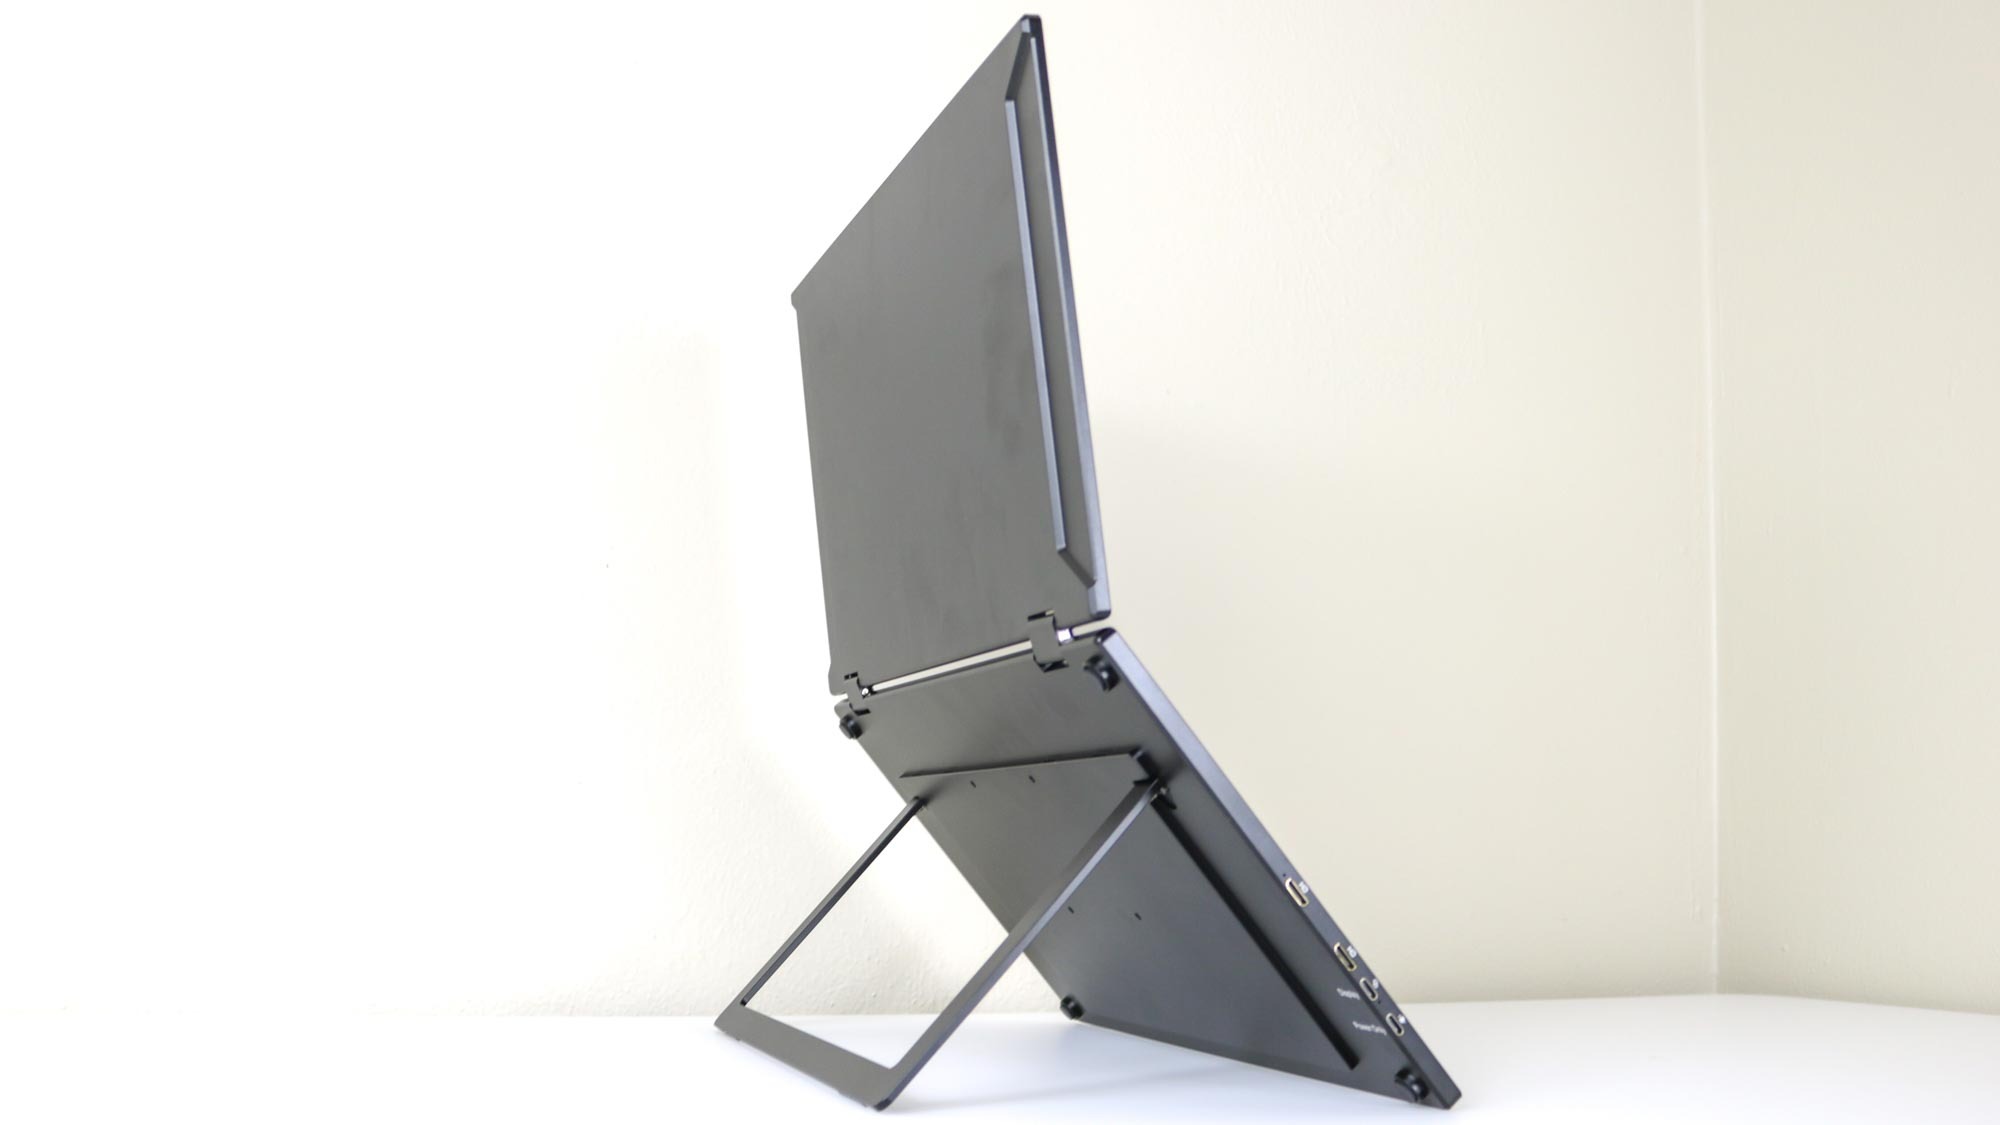 The UPERFECT UStation Delta dual-screen portable monitor standing up on a desk using its built-in stand